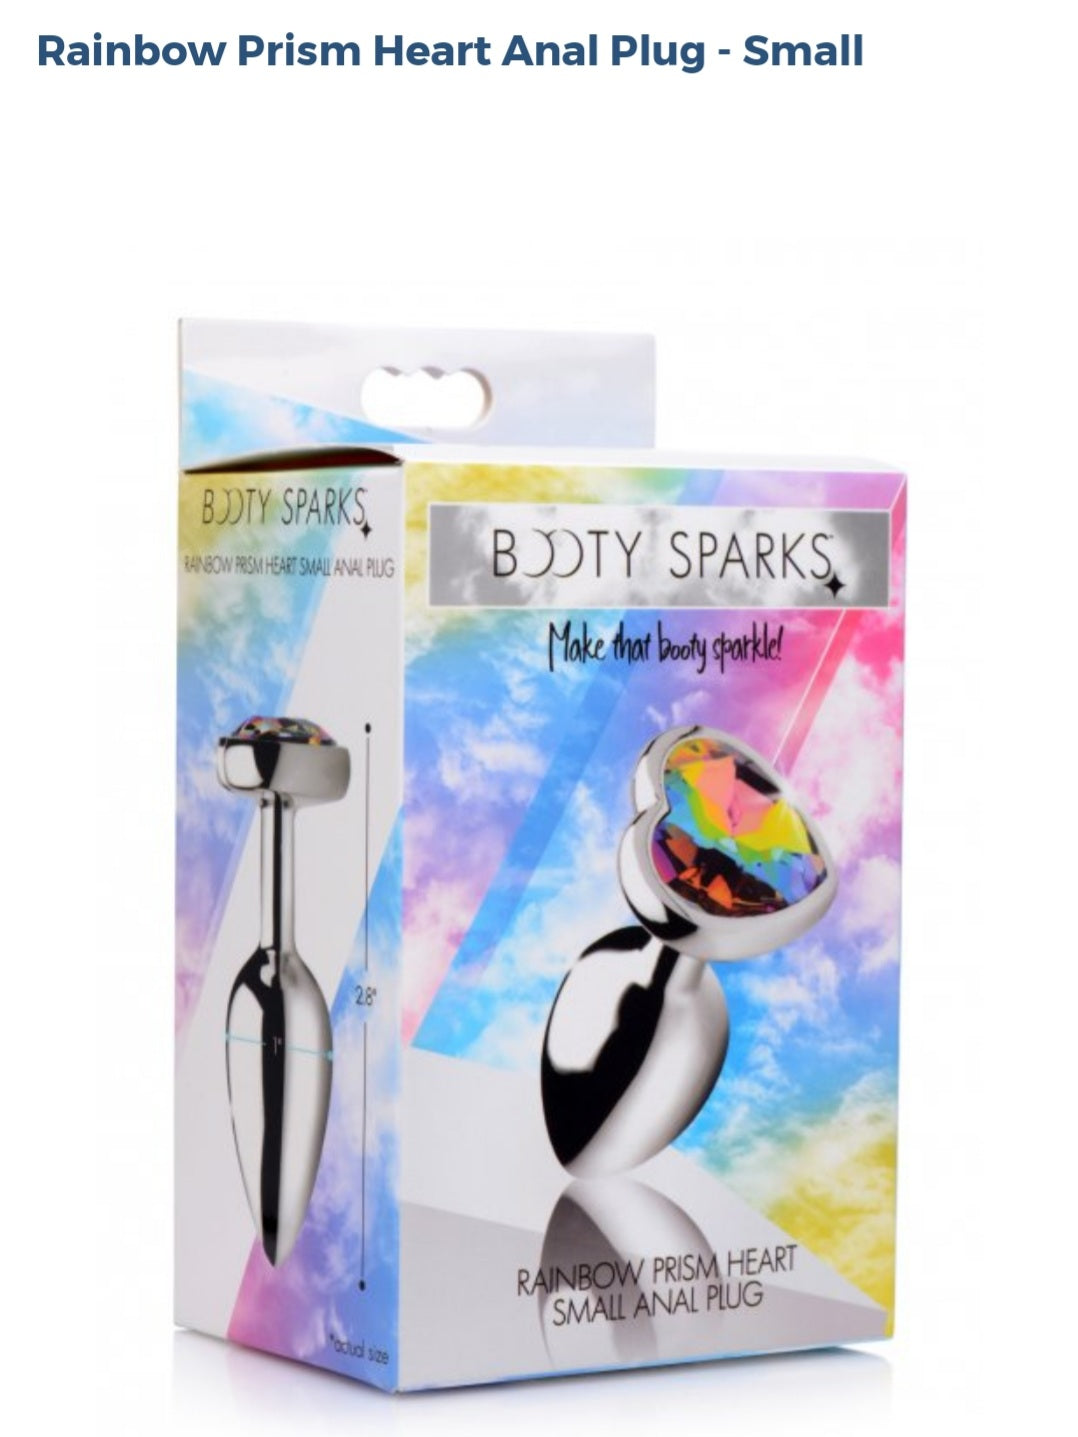 Booty Sparks Rainbow 🌈 Prism Heart ❤ Shaped Anal Plug-Small